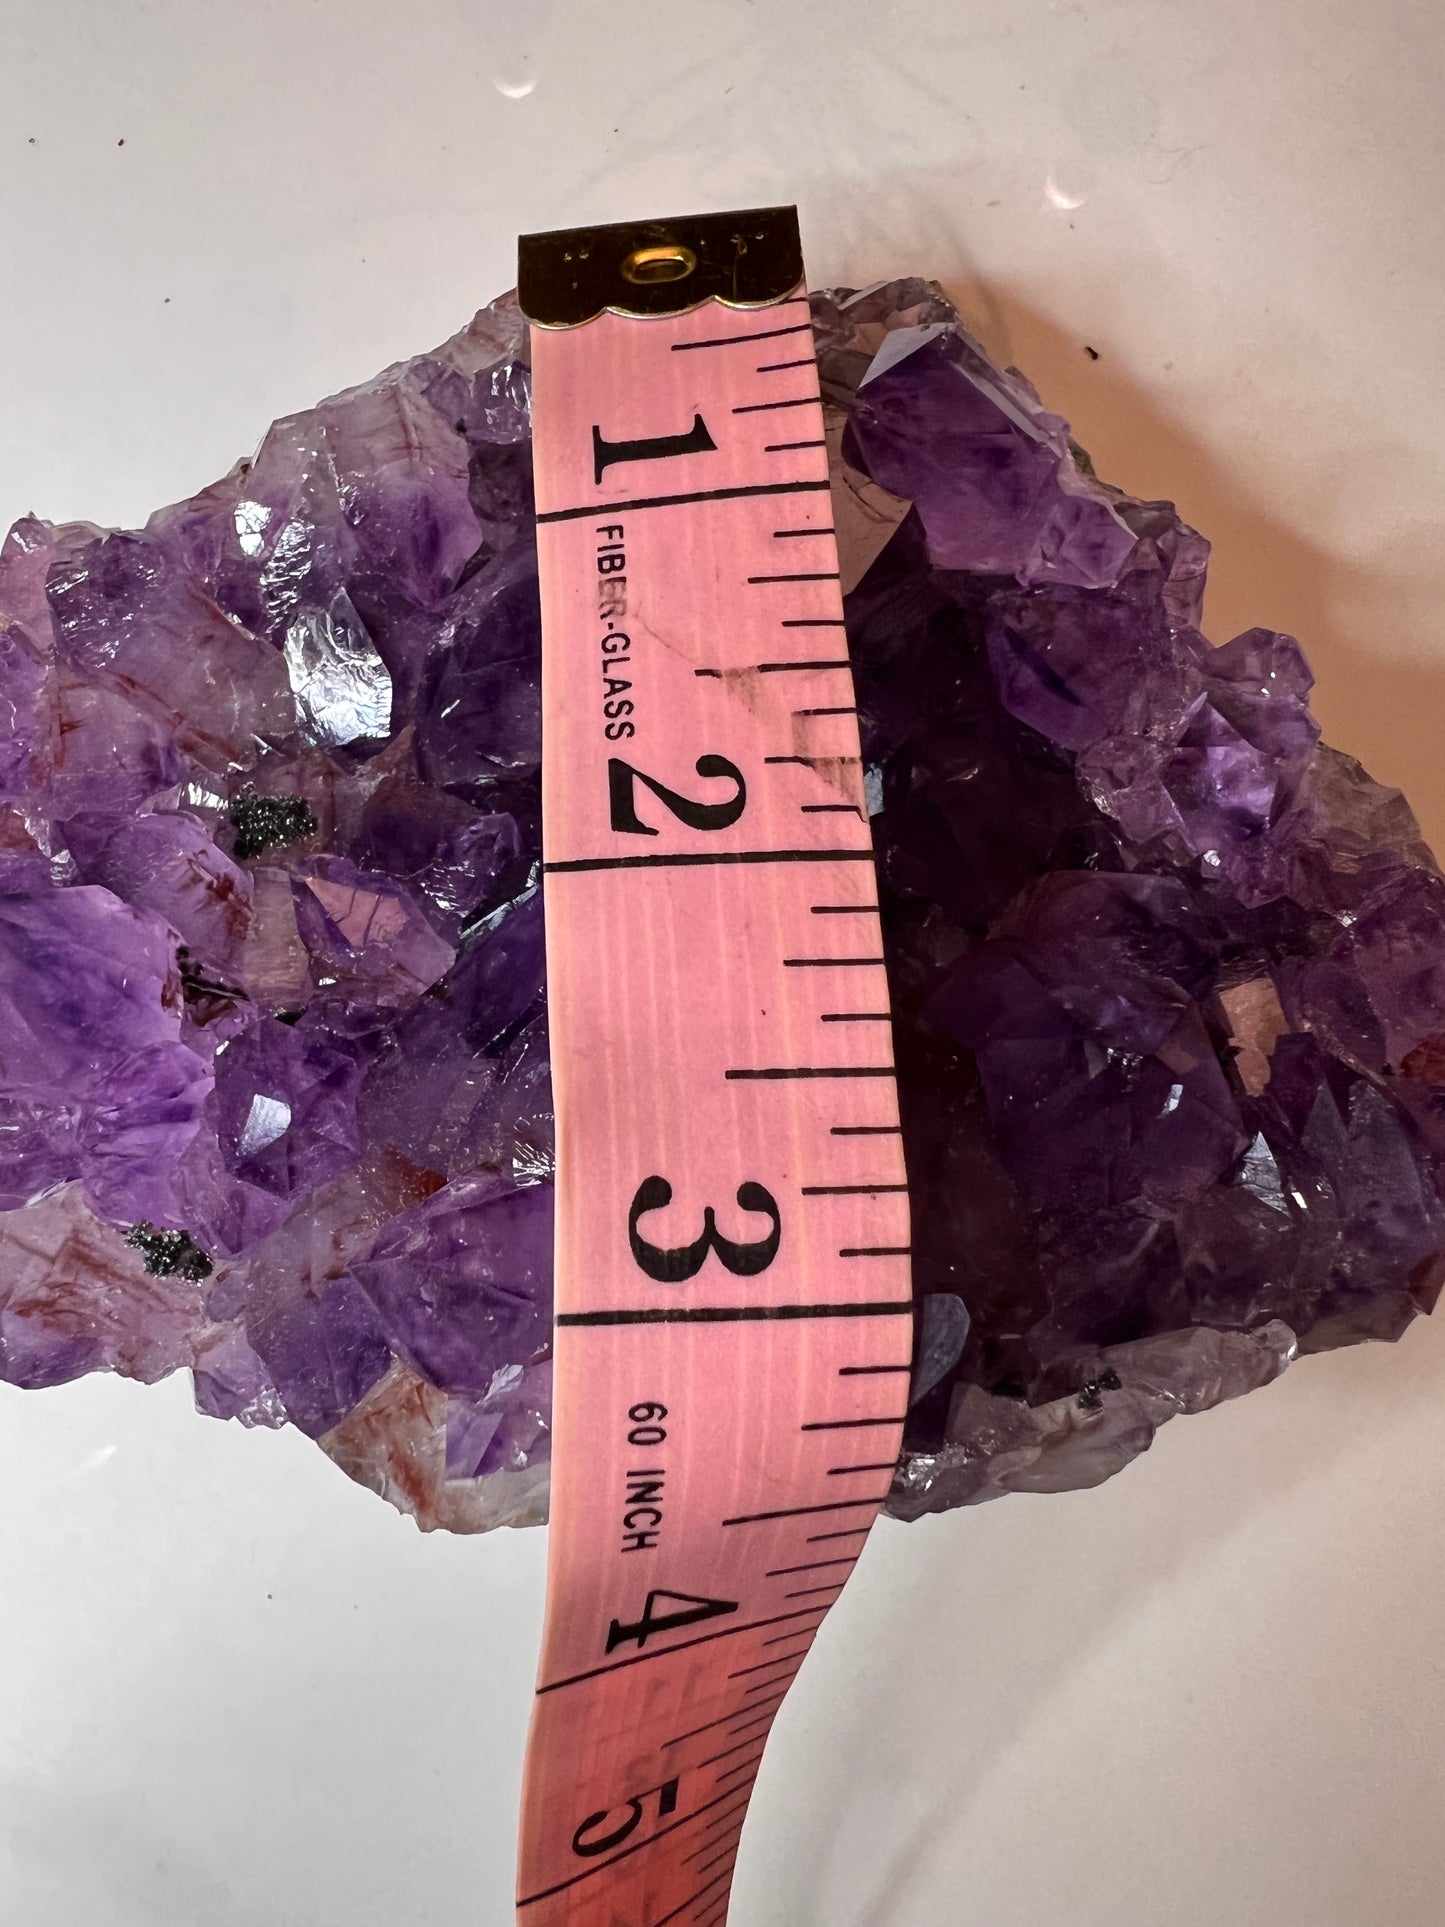 Amethyst Cluster with Black Druzy Inclusions